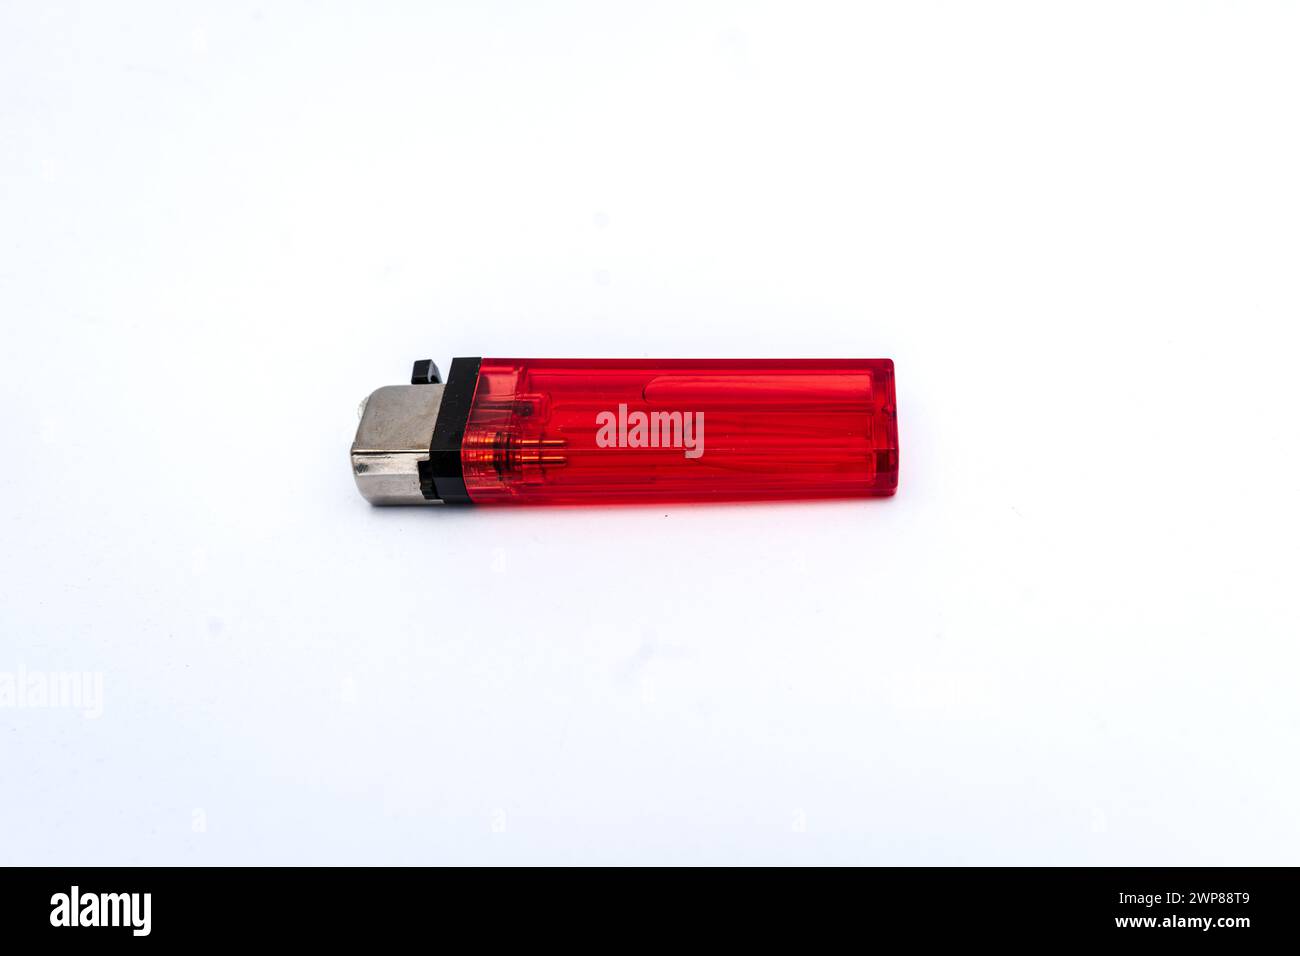 Cheap red cigarette gas lighter made of plastic isolated on white background. Stock Photo